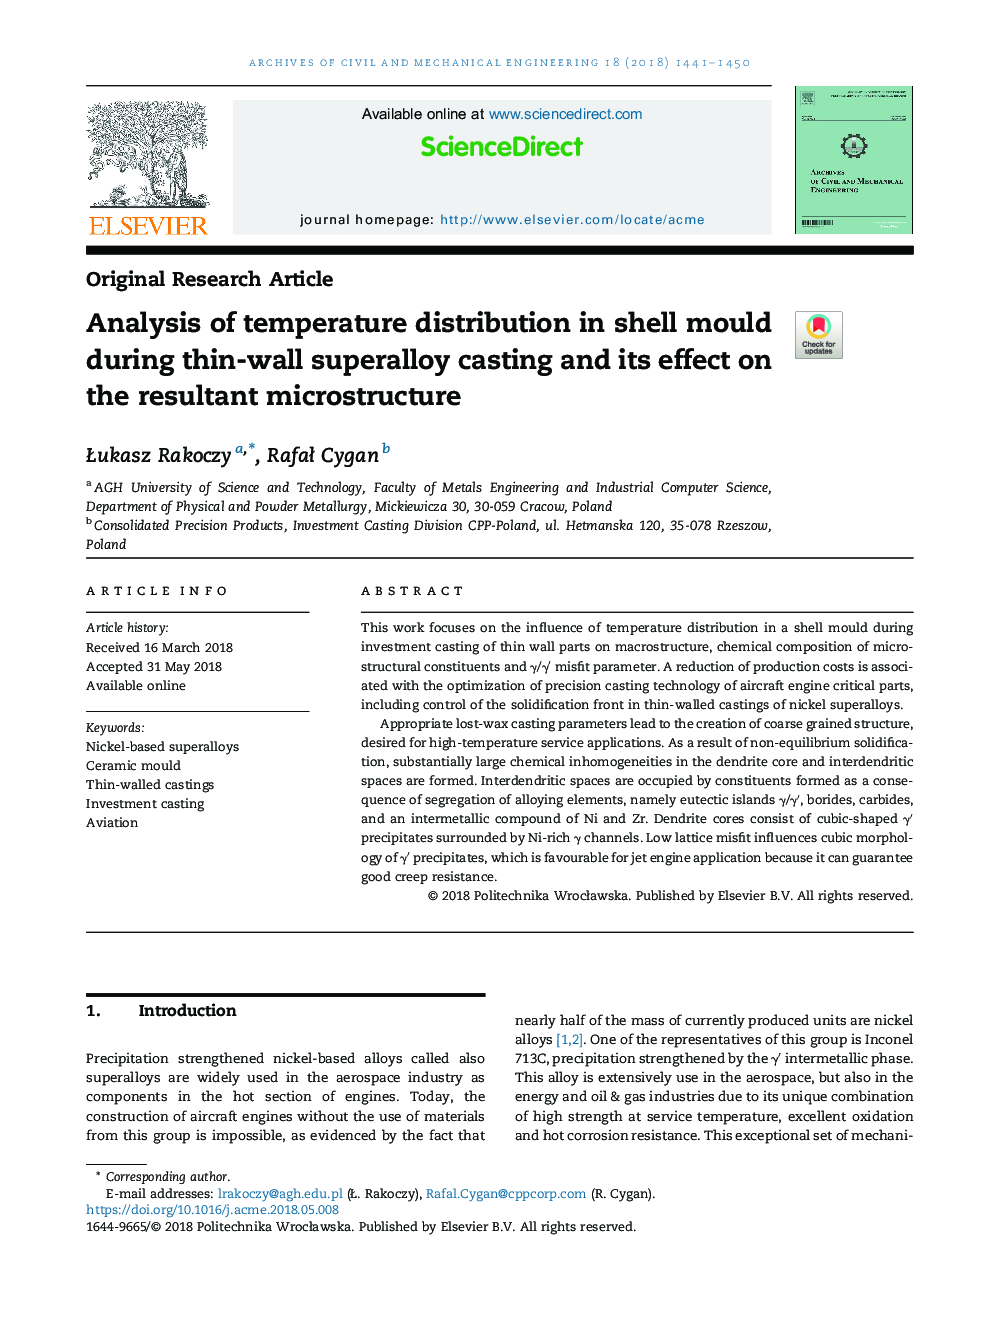 Analysis of temperature distribution in shell mould during thin-wall superalloy casting and its effect on the resultant microstructure